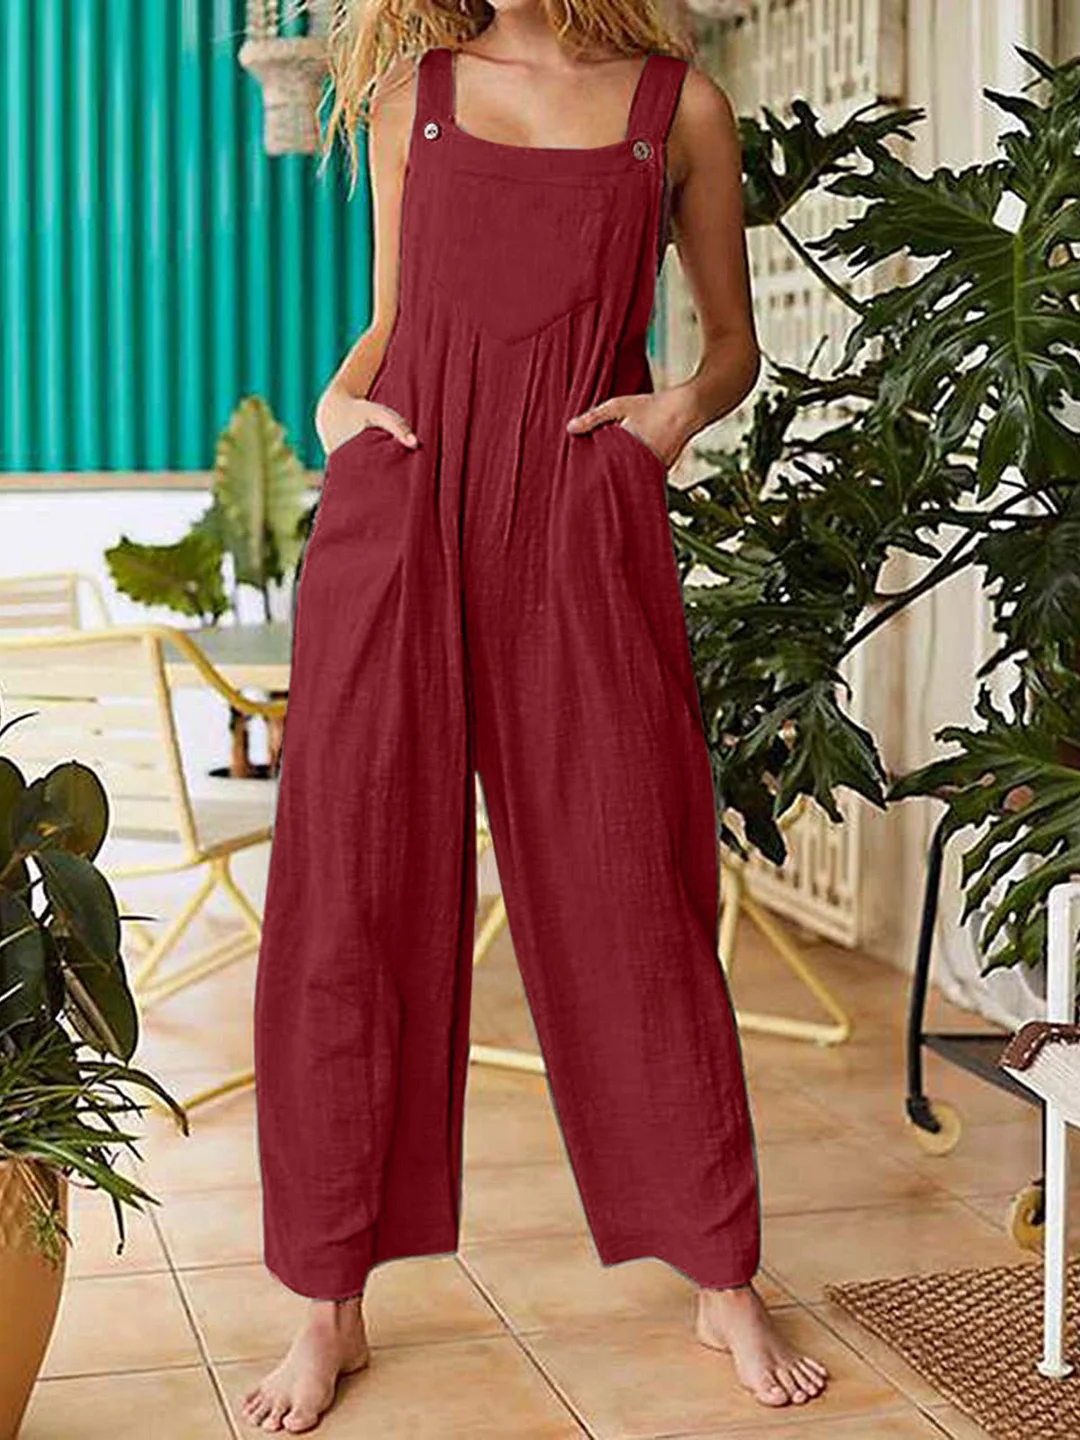 Women's Home Wear Solid Color Overalls One-piece Strappy Pants